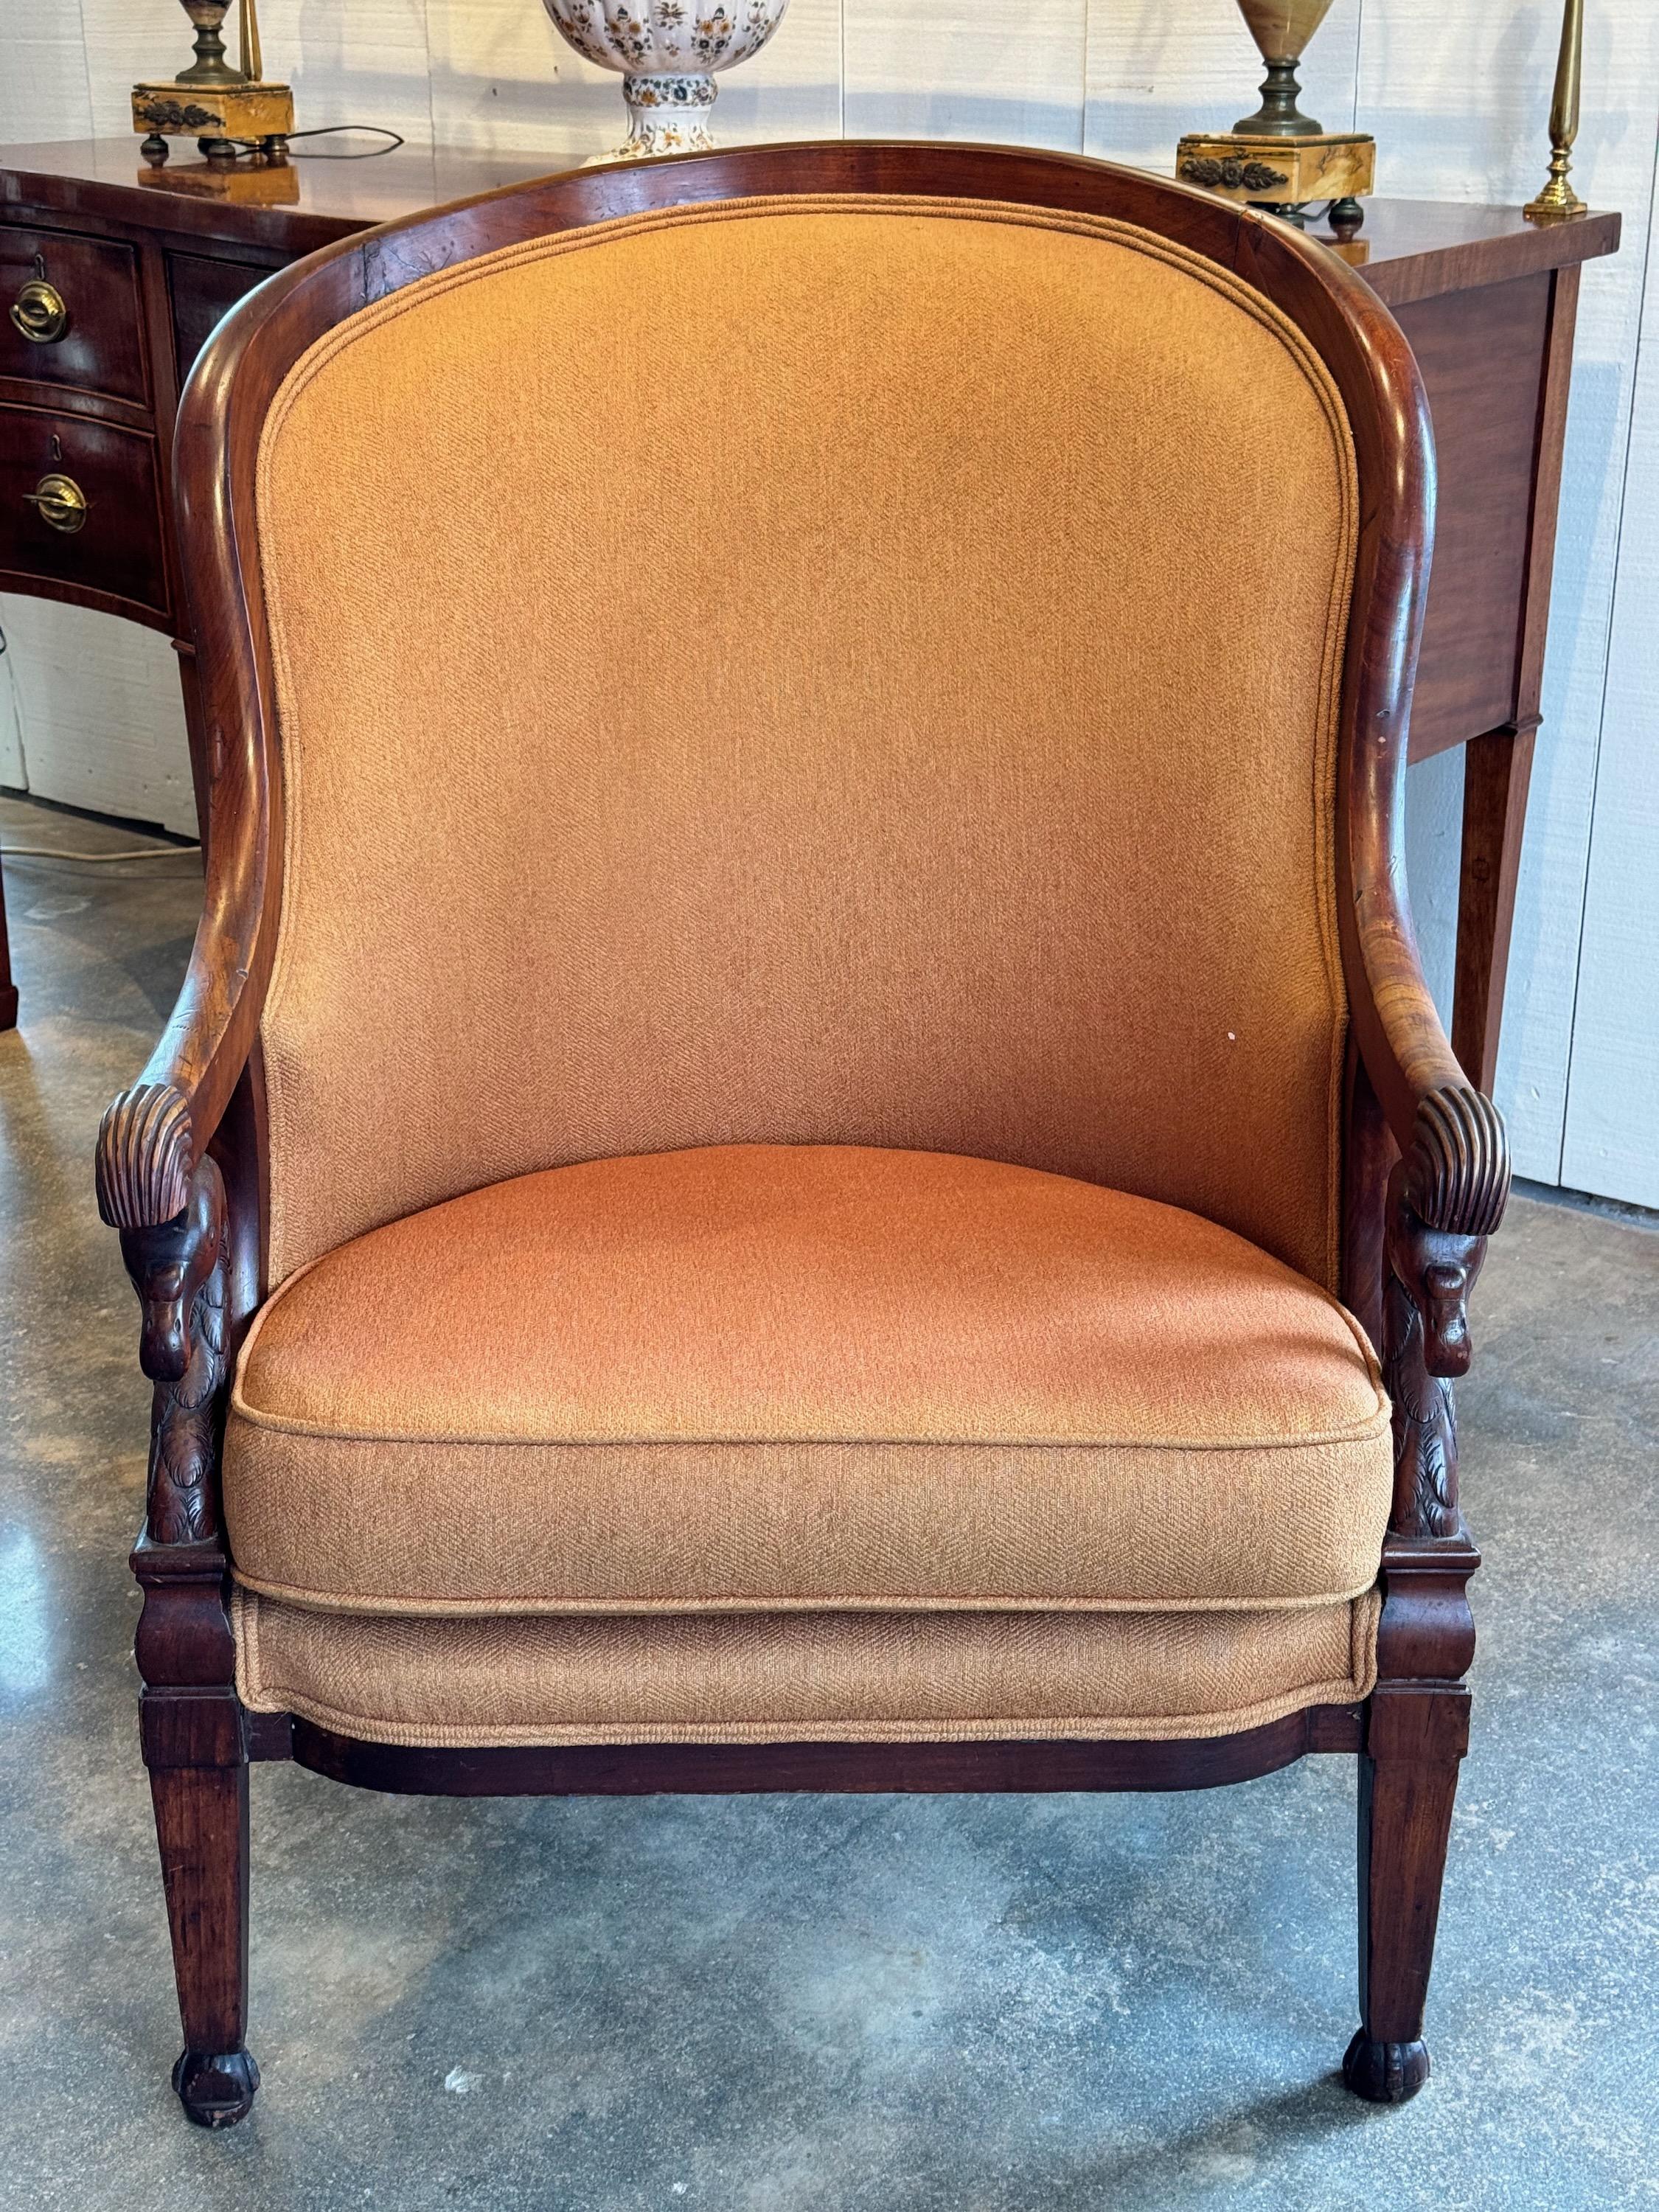 This bergere is beautiful and of great size. Will add comfort and style .